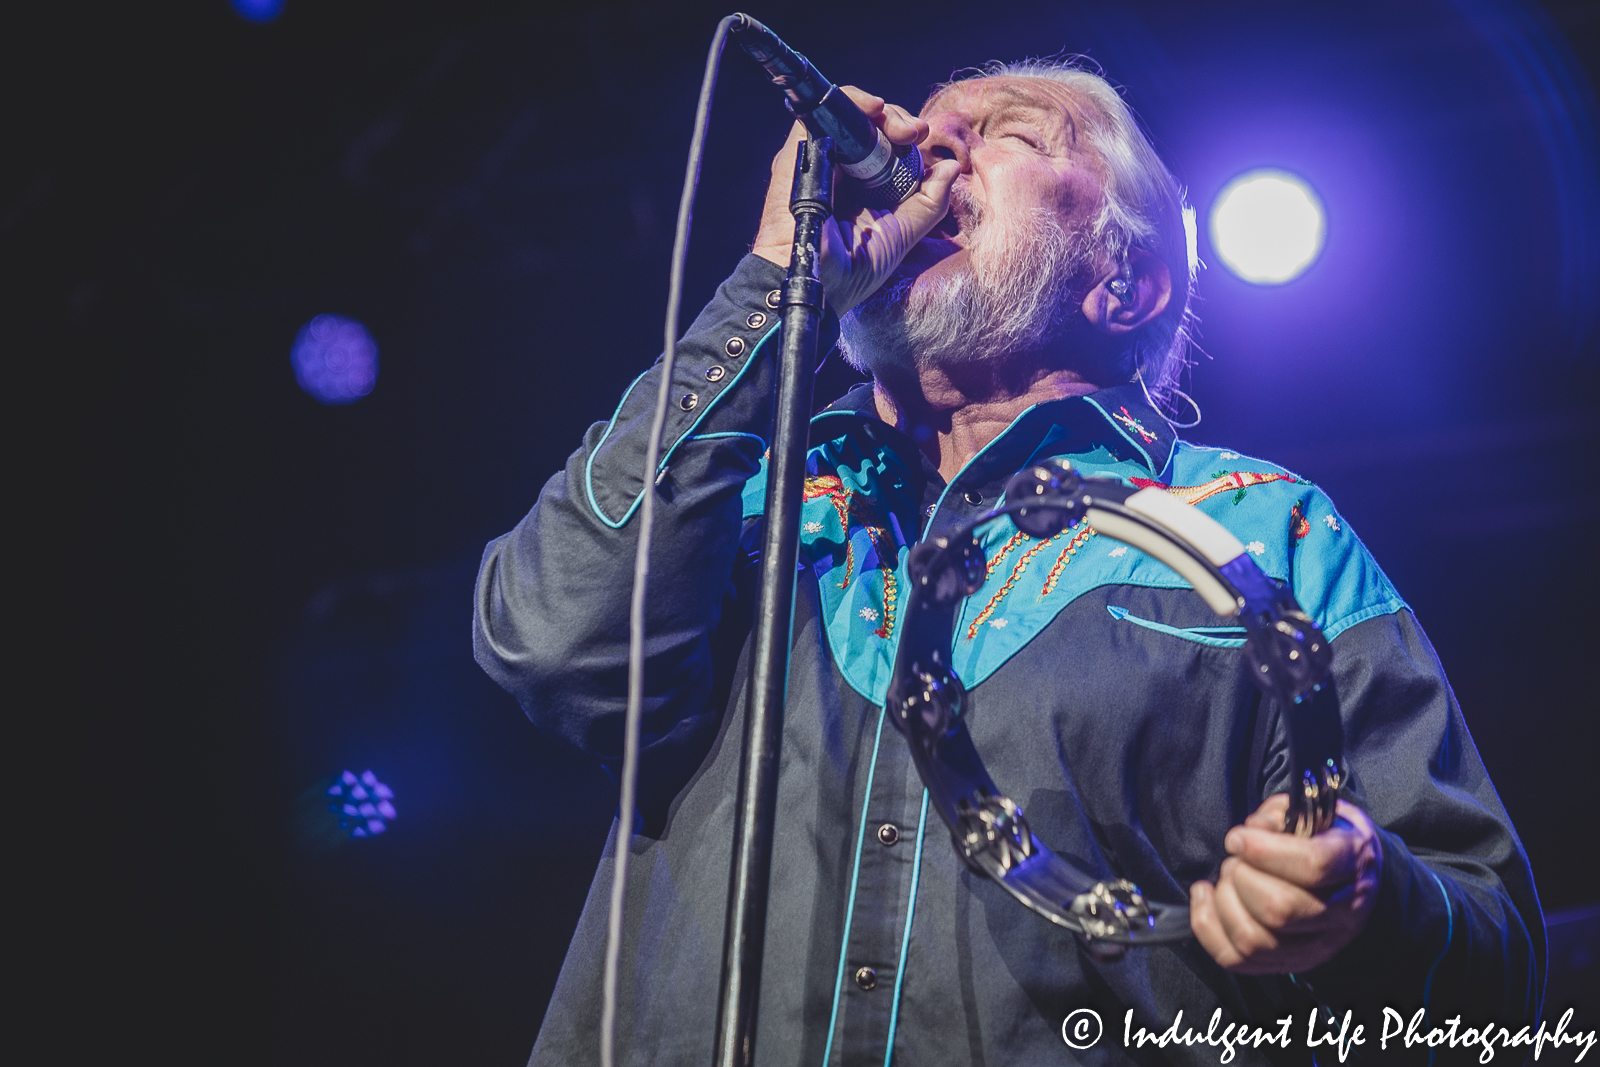 The Marshall Tucker Band frontman Doug Gray live in concert at Star Pavilion inside of Ameristar Casino in Kansas City, MO on October 28, 2022.